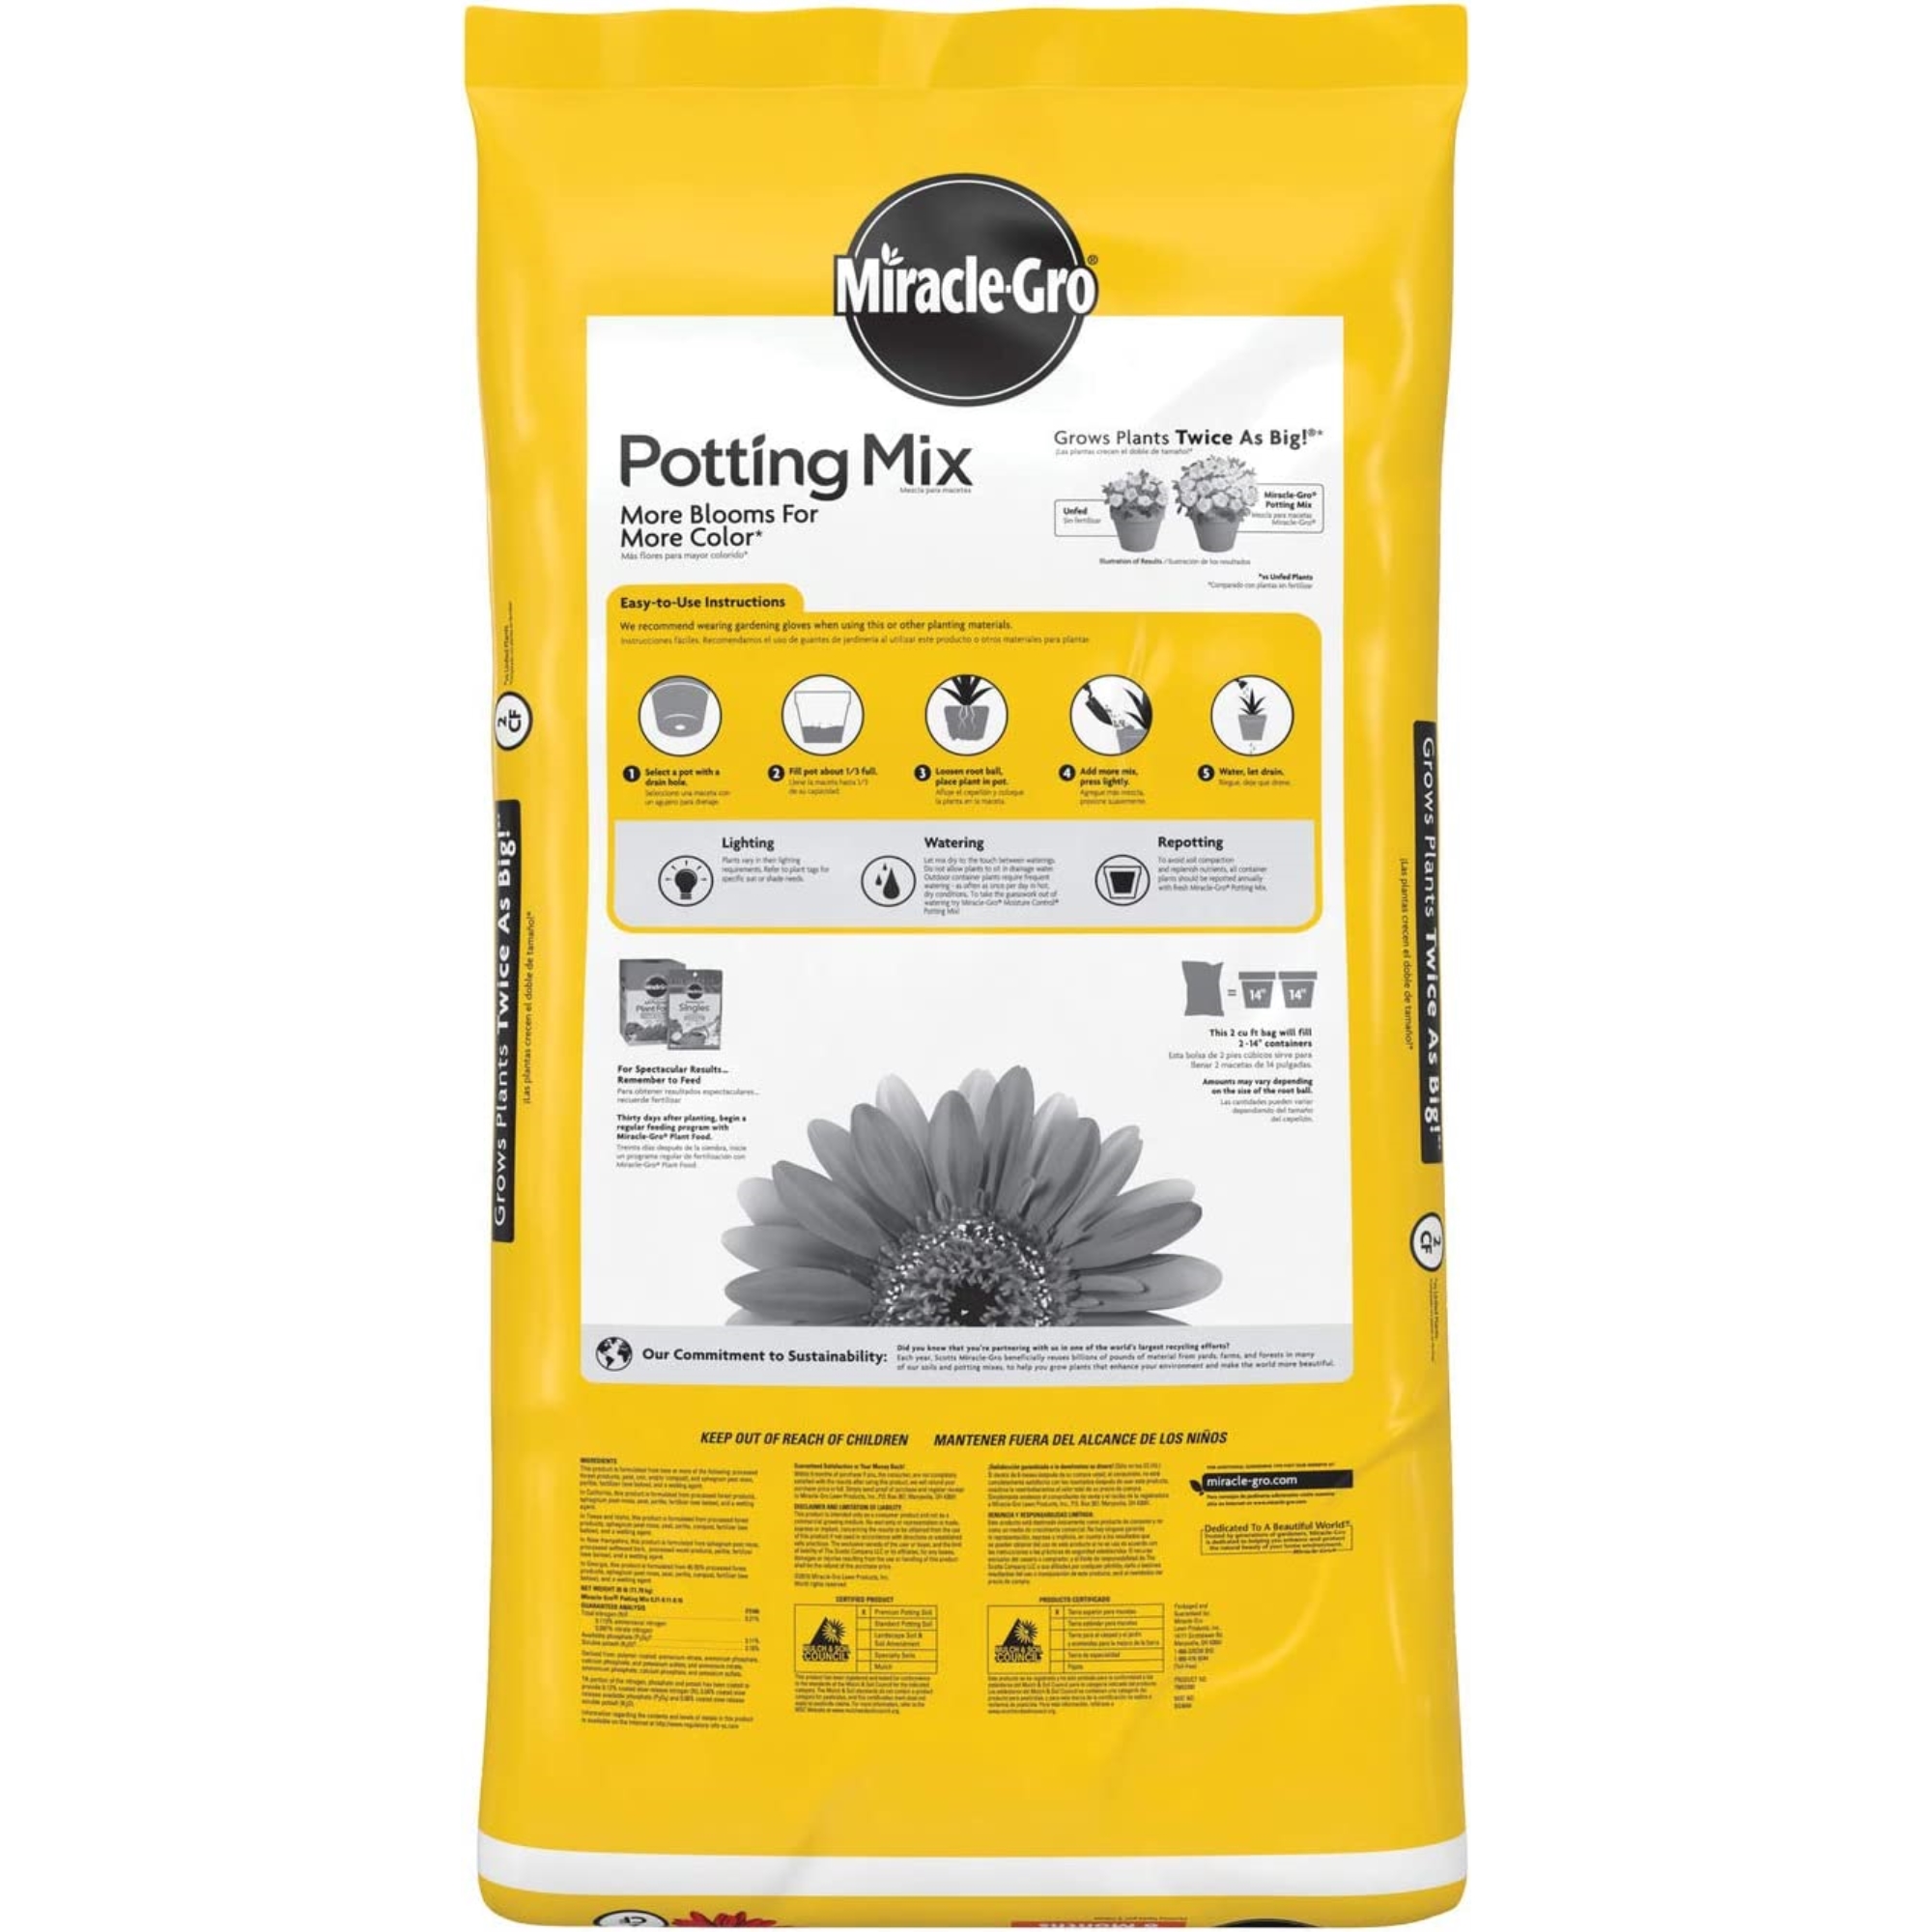 Miracle-Gro Potting Mix, 2 cu. ft., Feeds Plants up to 6 Months - image 3 of 8